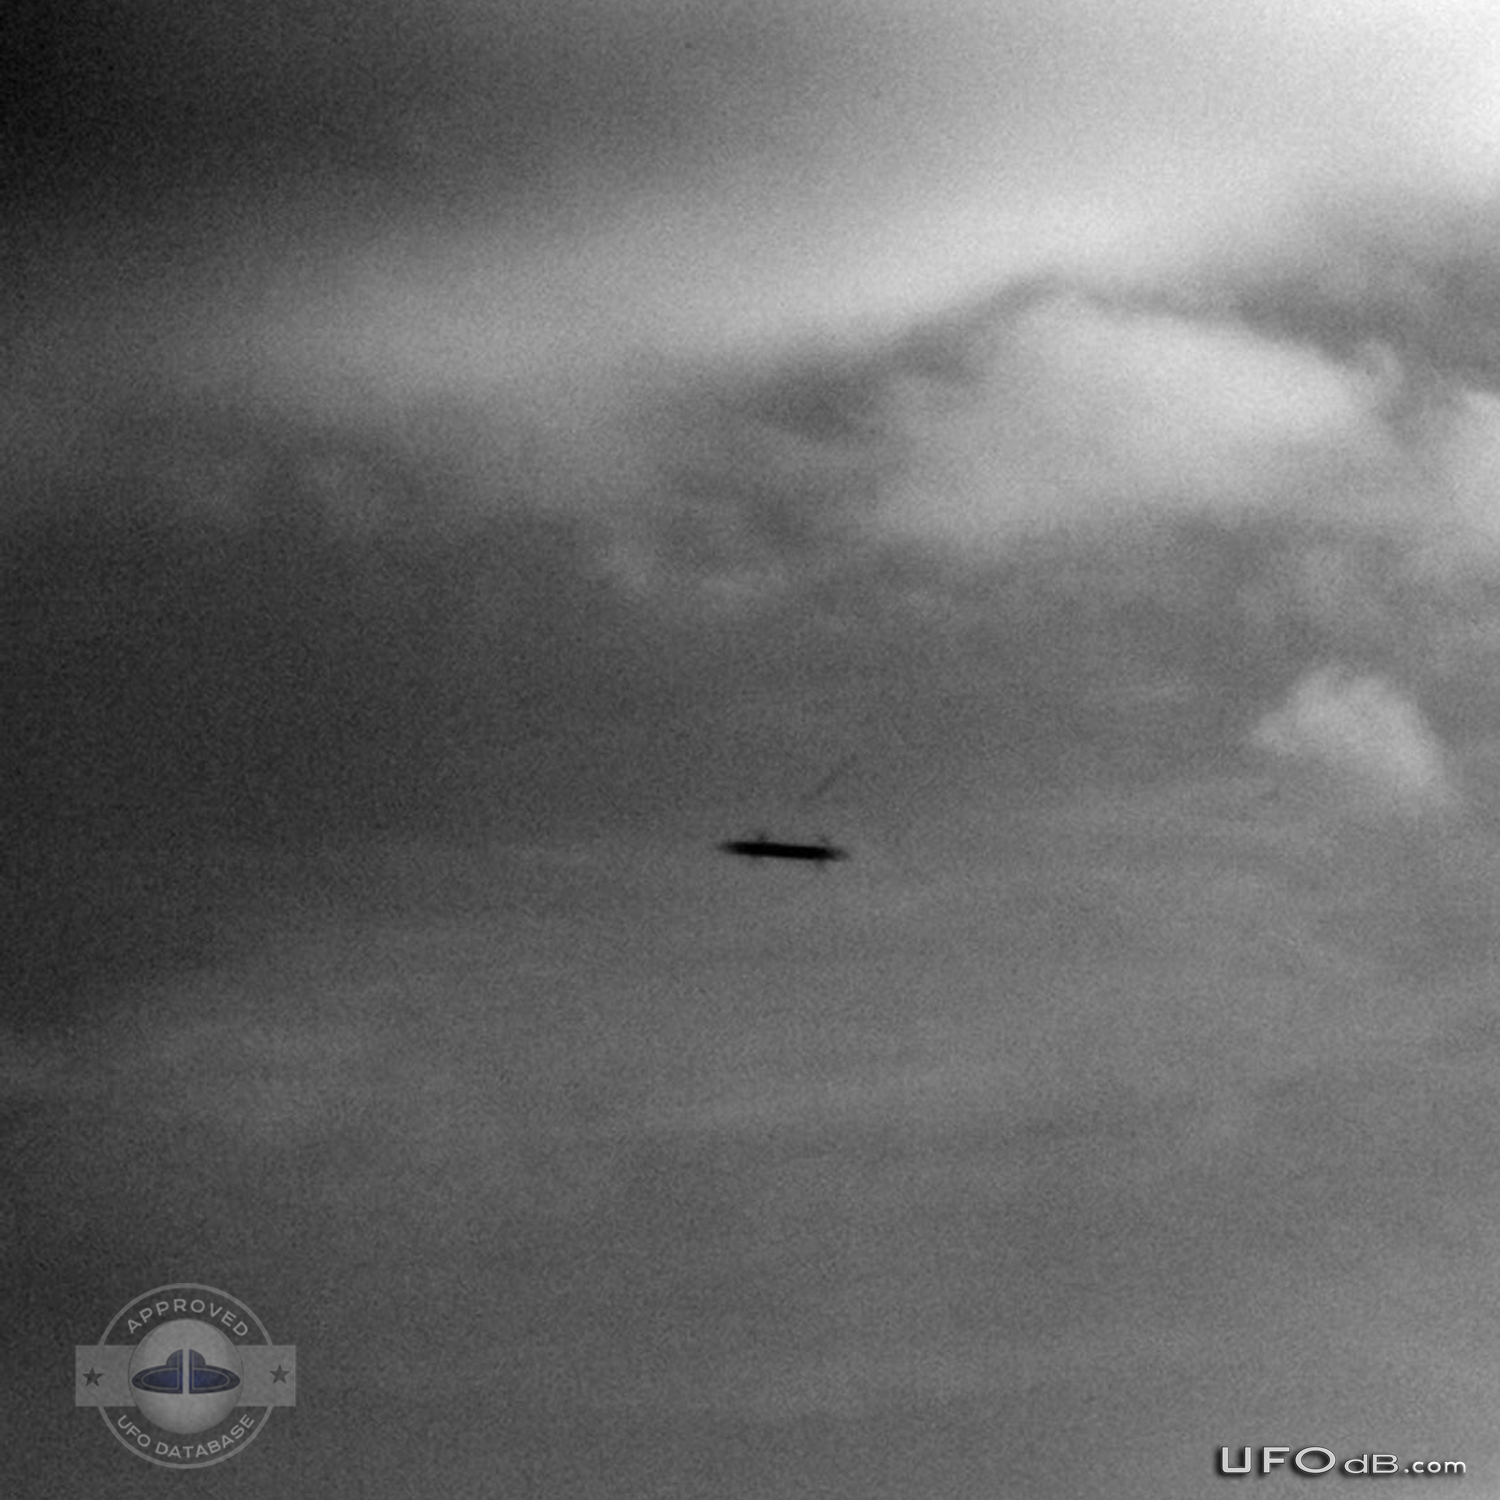 Dark Winged Saucer UFO over the town of Havant, England | April 7 2011 UFO Picture #263-2